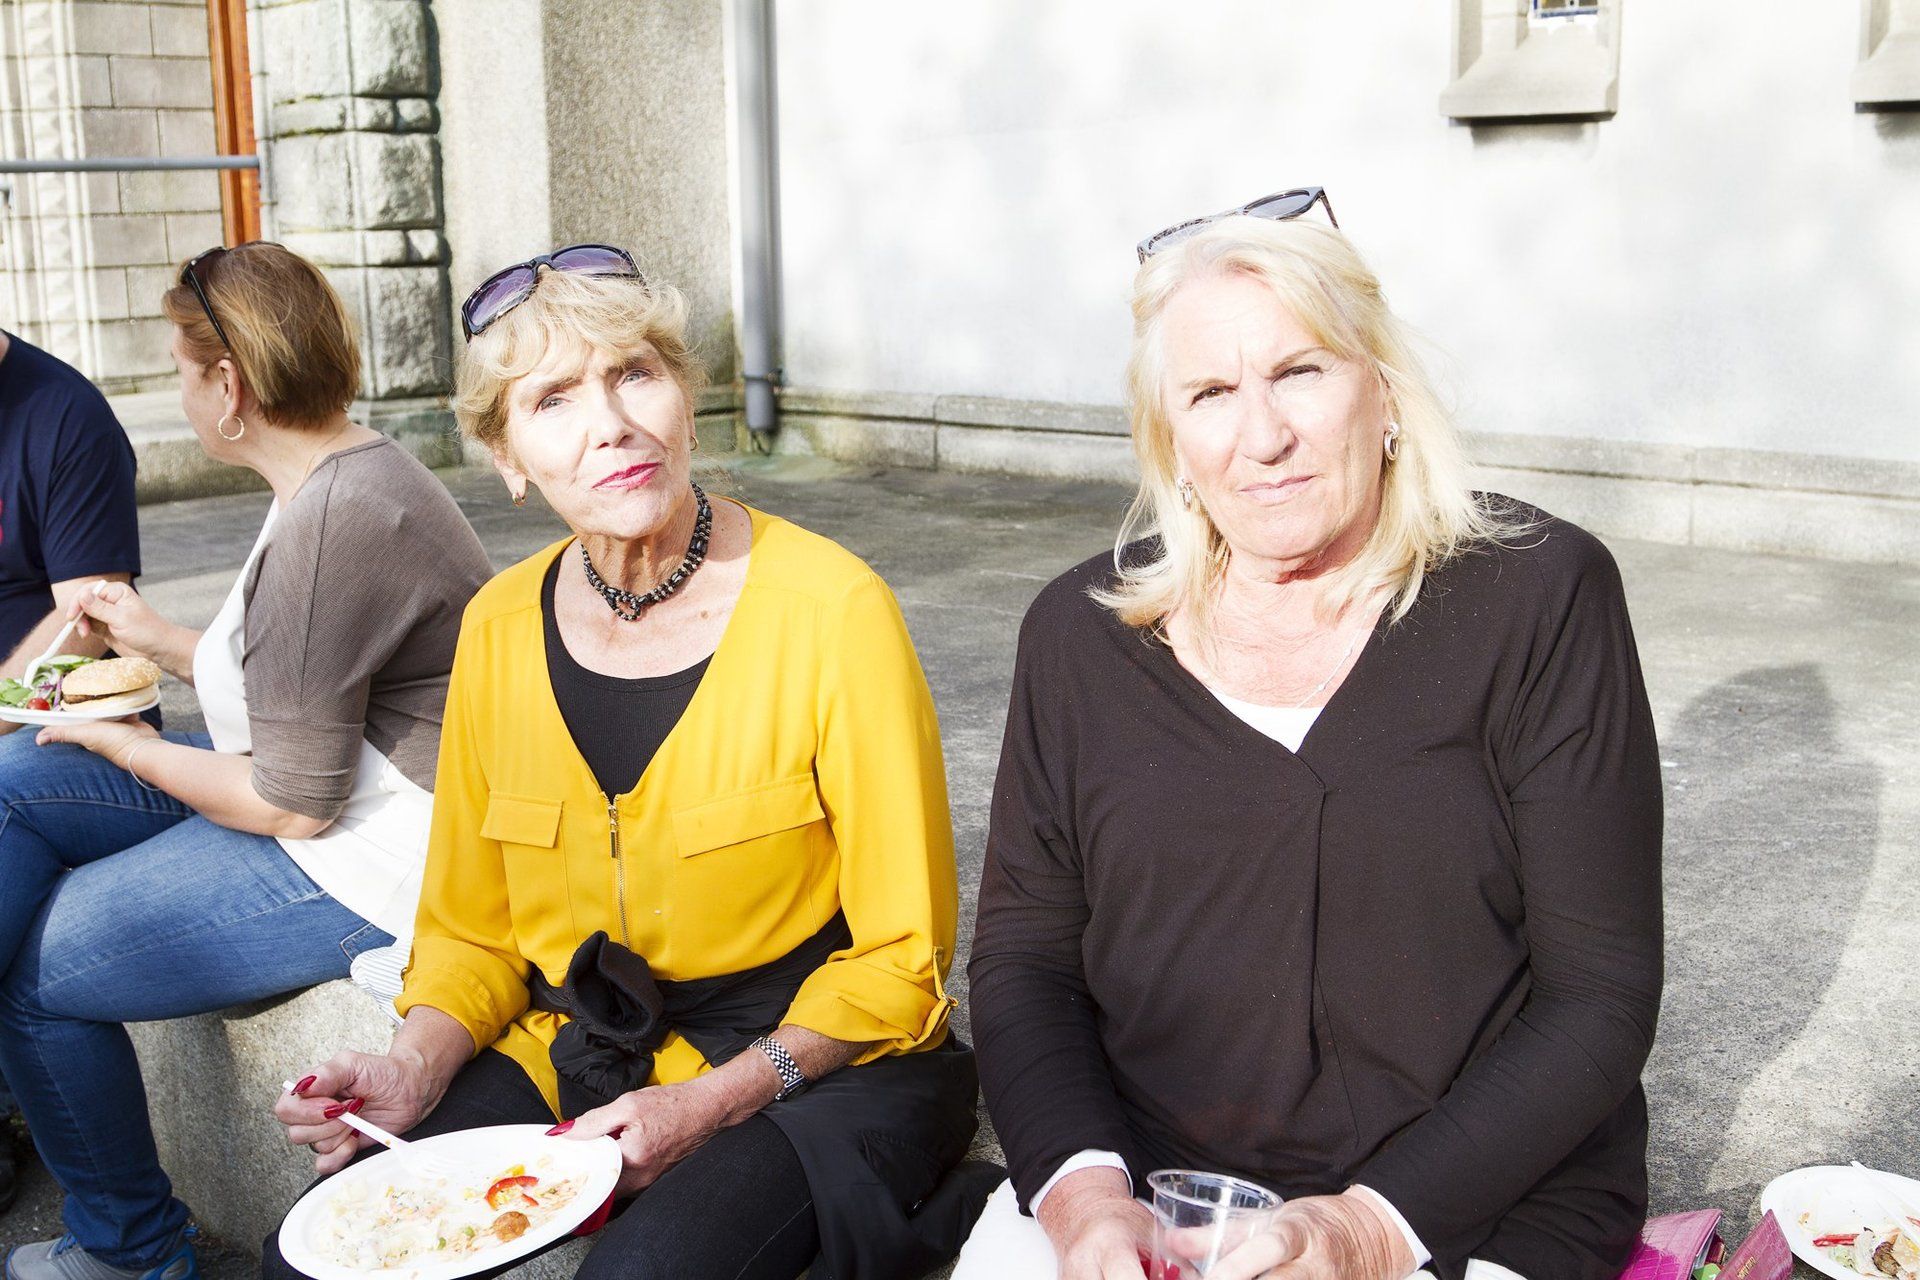 Two women are sitting on a bench with plates of food in their hands.